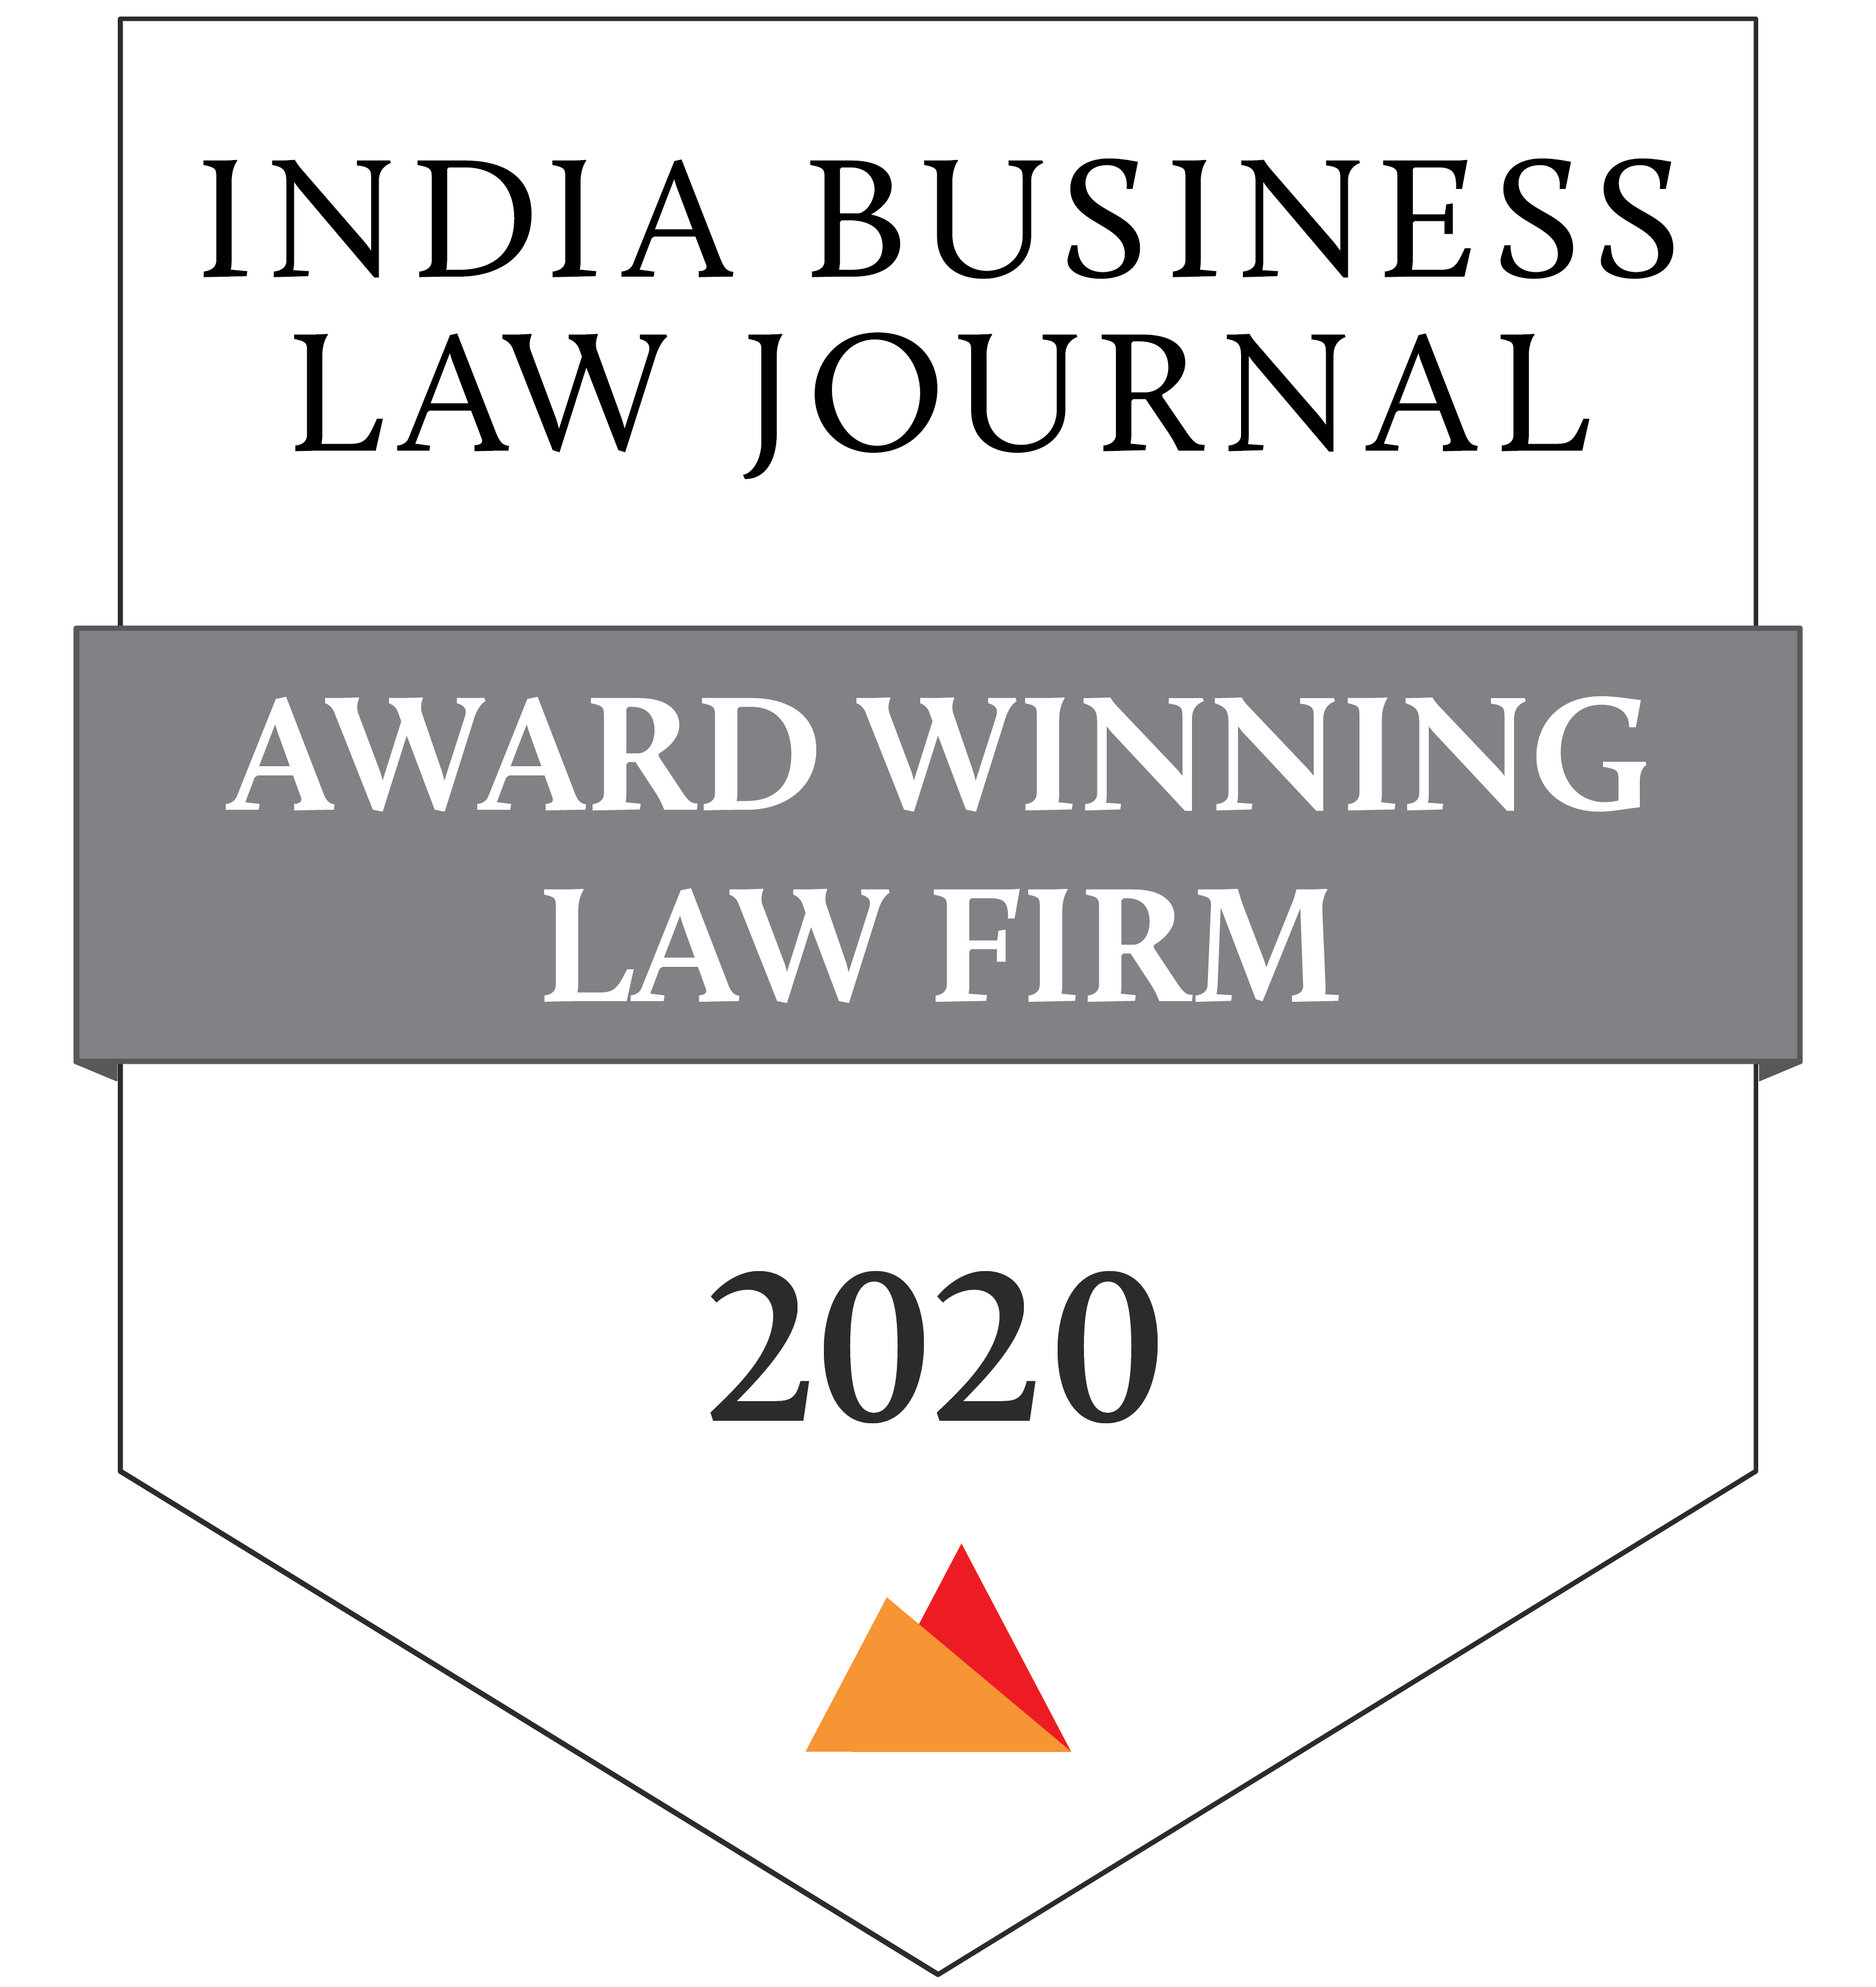 India Business Law Journal Awards 2020